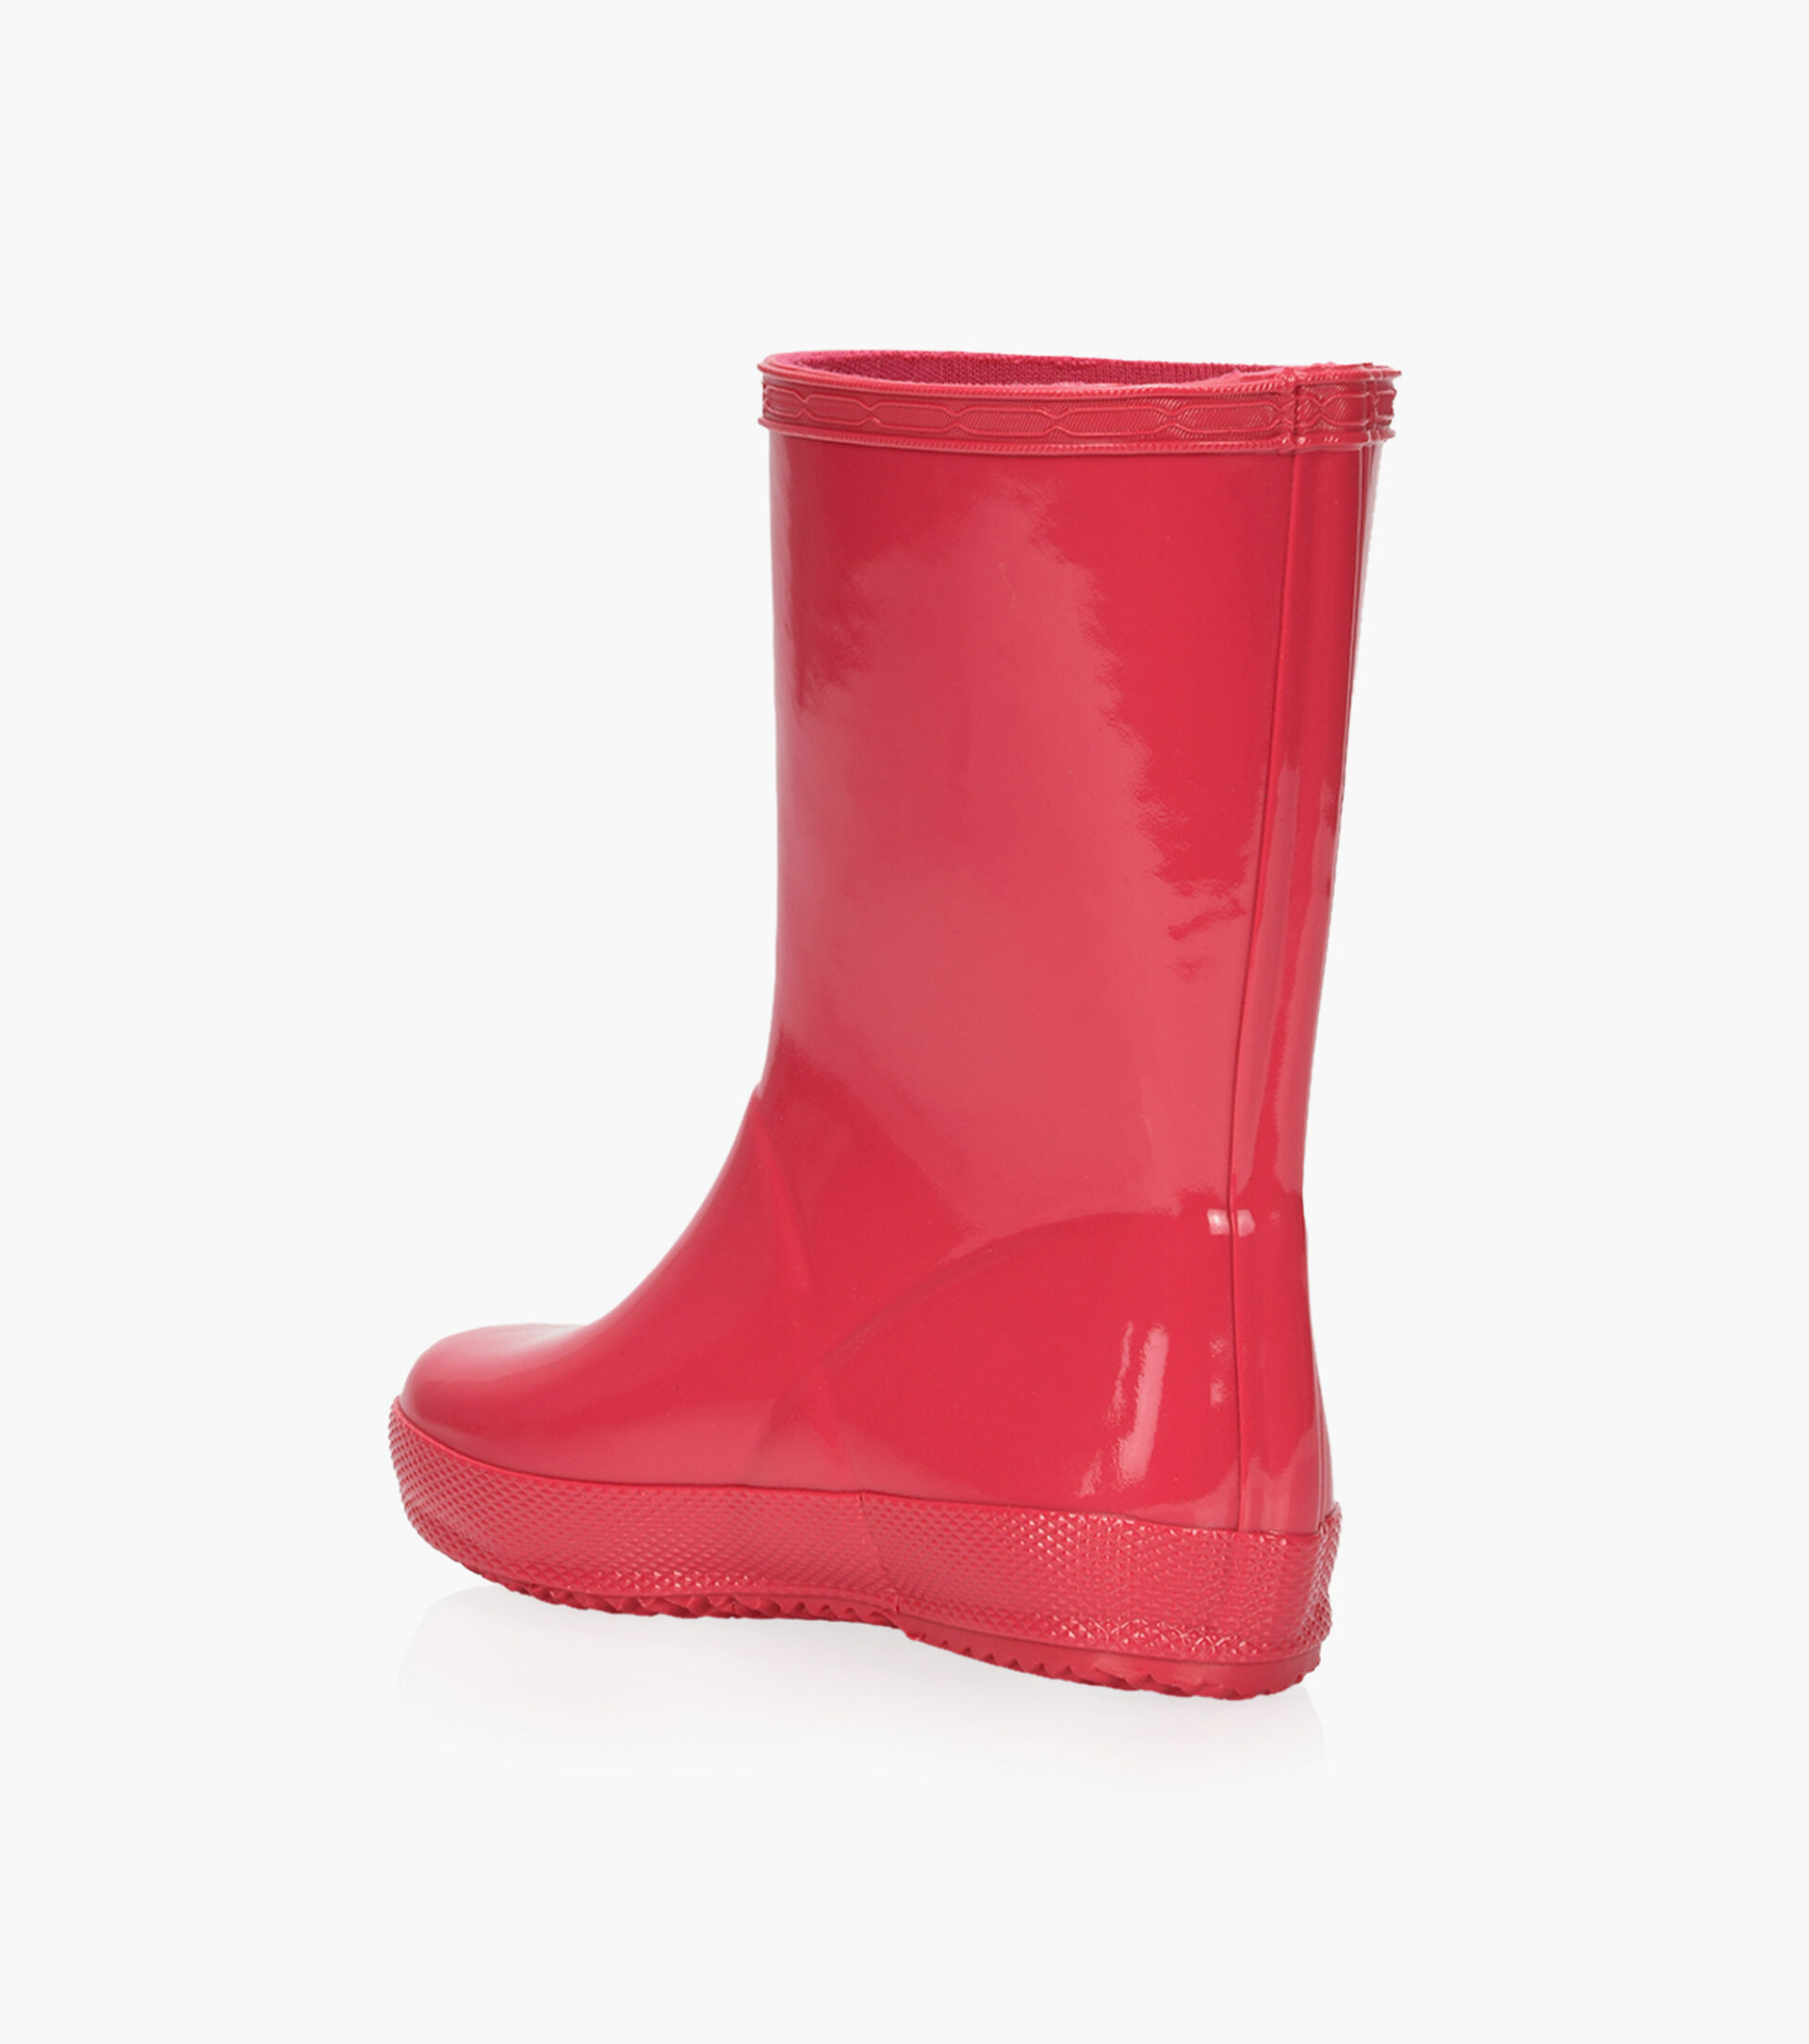 HUNTER KIDS FIRST CLASSIC RAINBOOTS | Browns Shoes